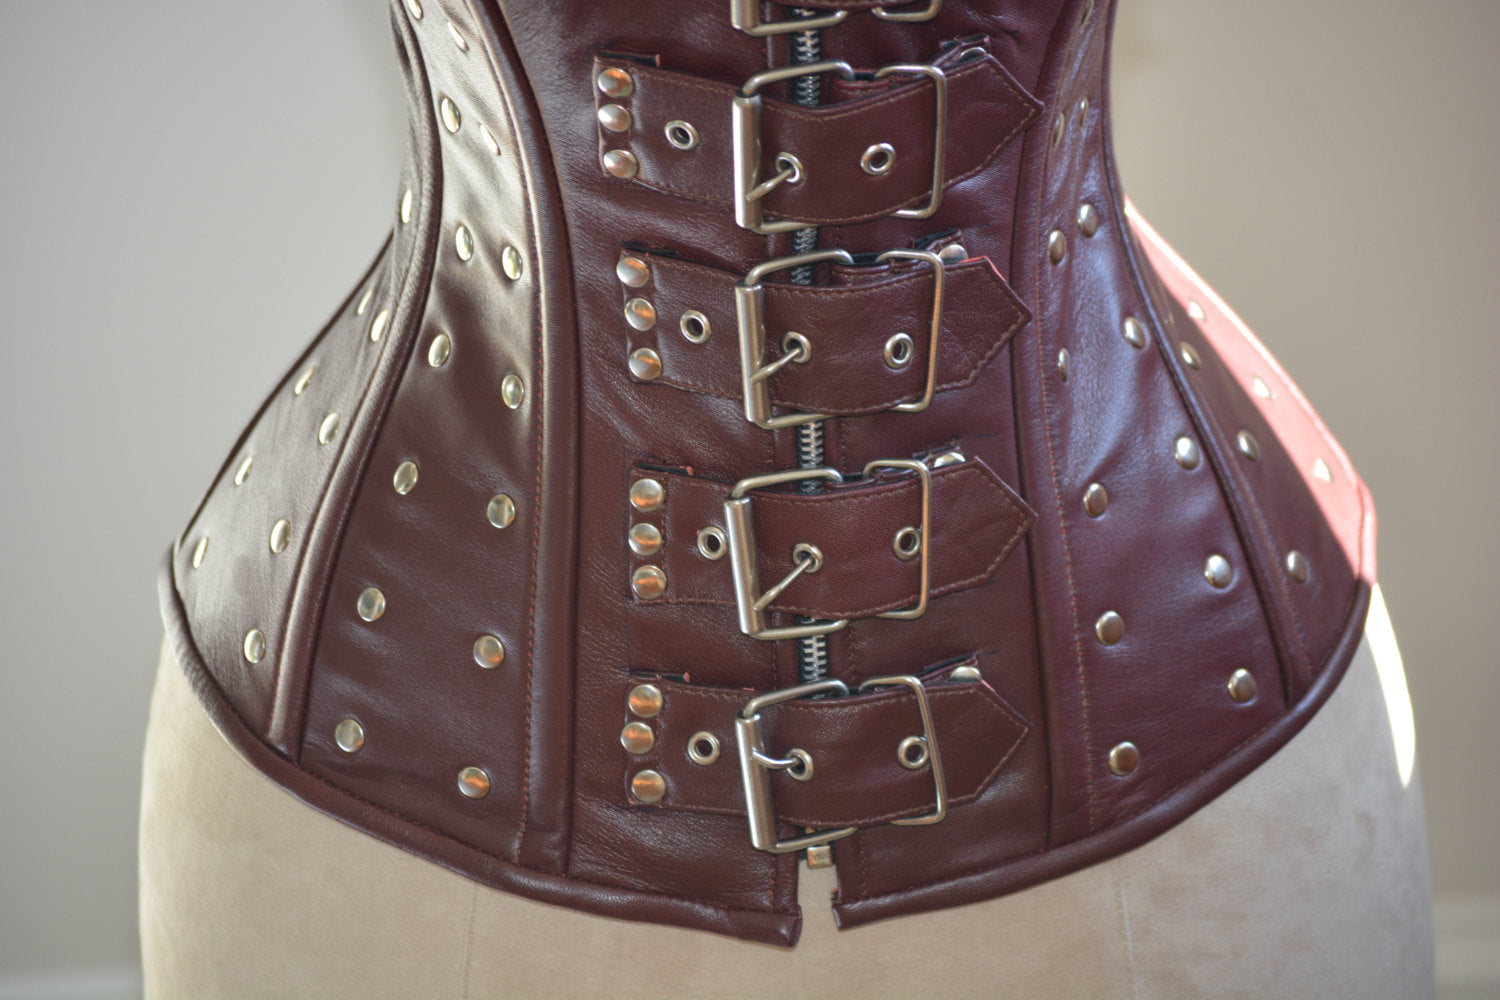 Long steel-boned corset, black, brown, white, red real leather. Gothic,  steampunk, bdsm, authentic waist training corset for tall